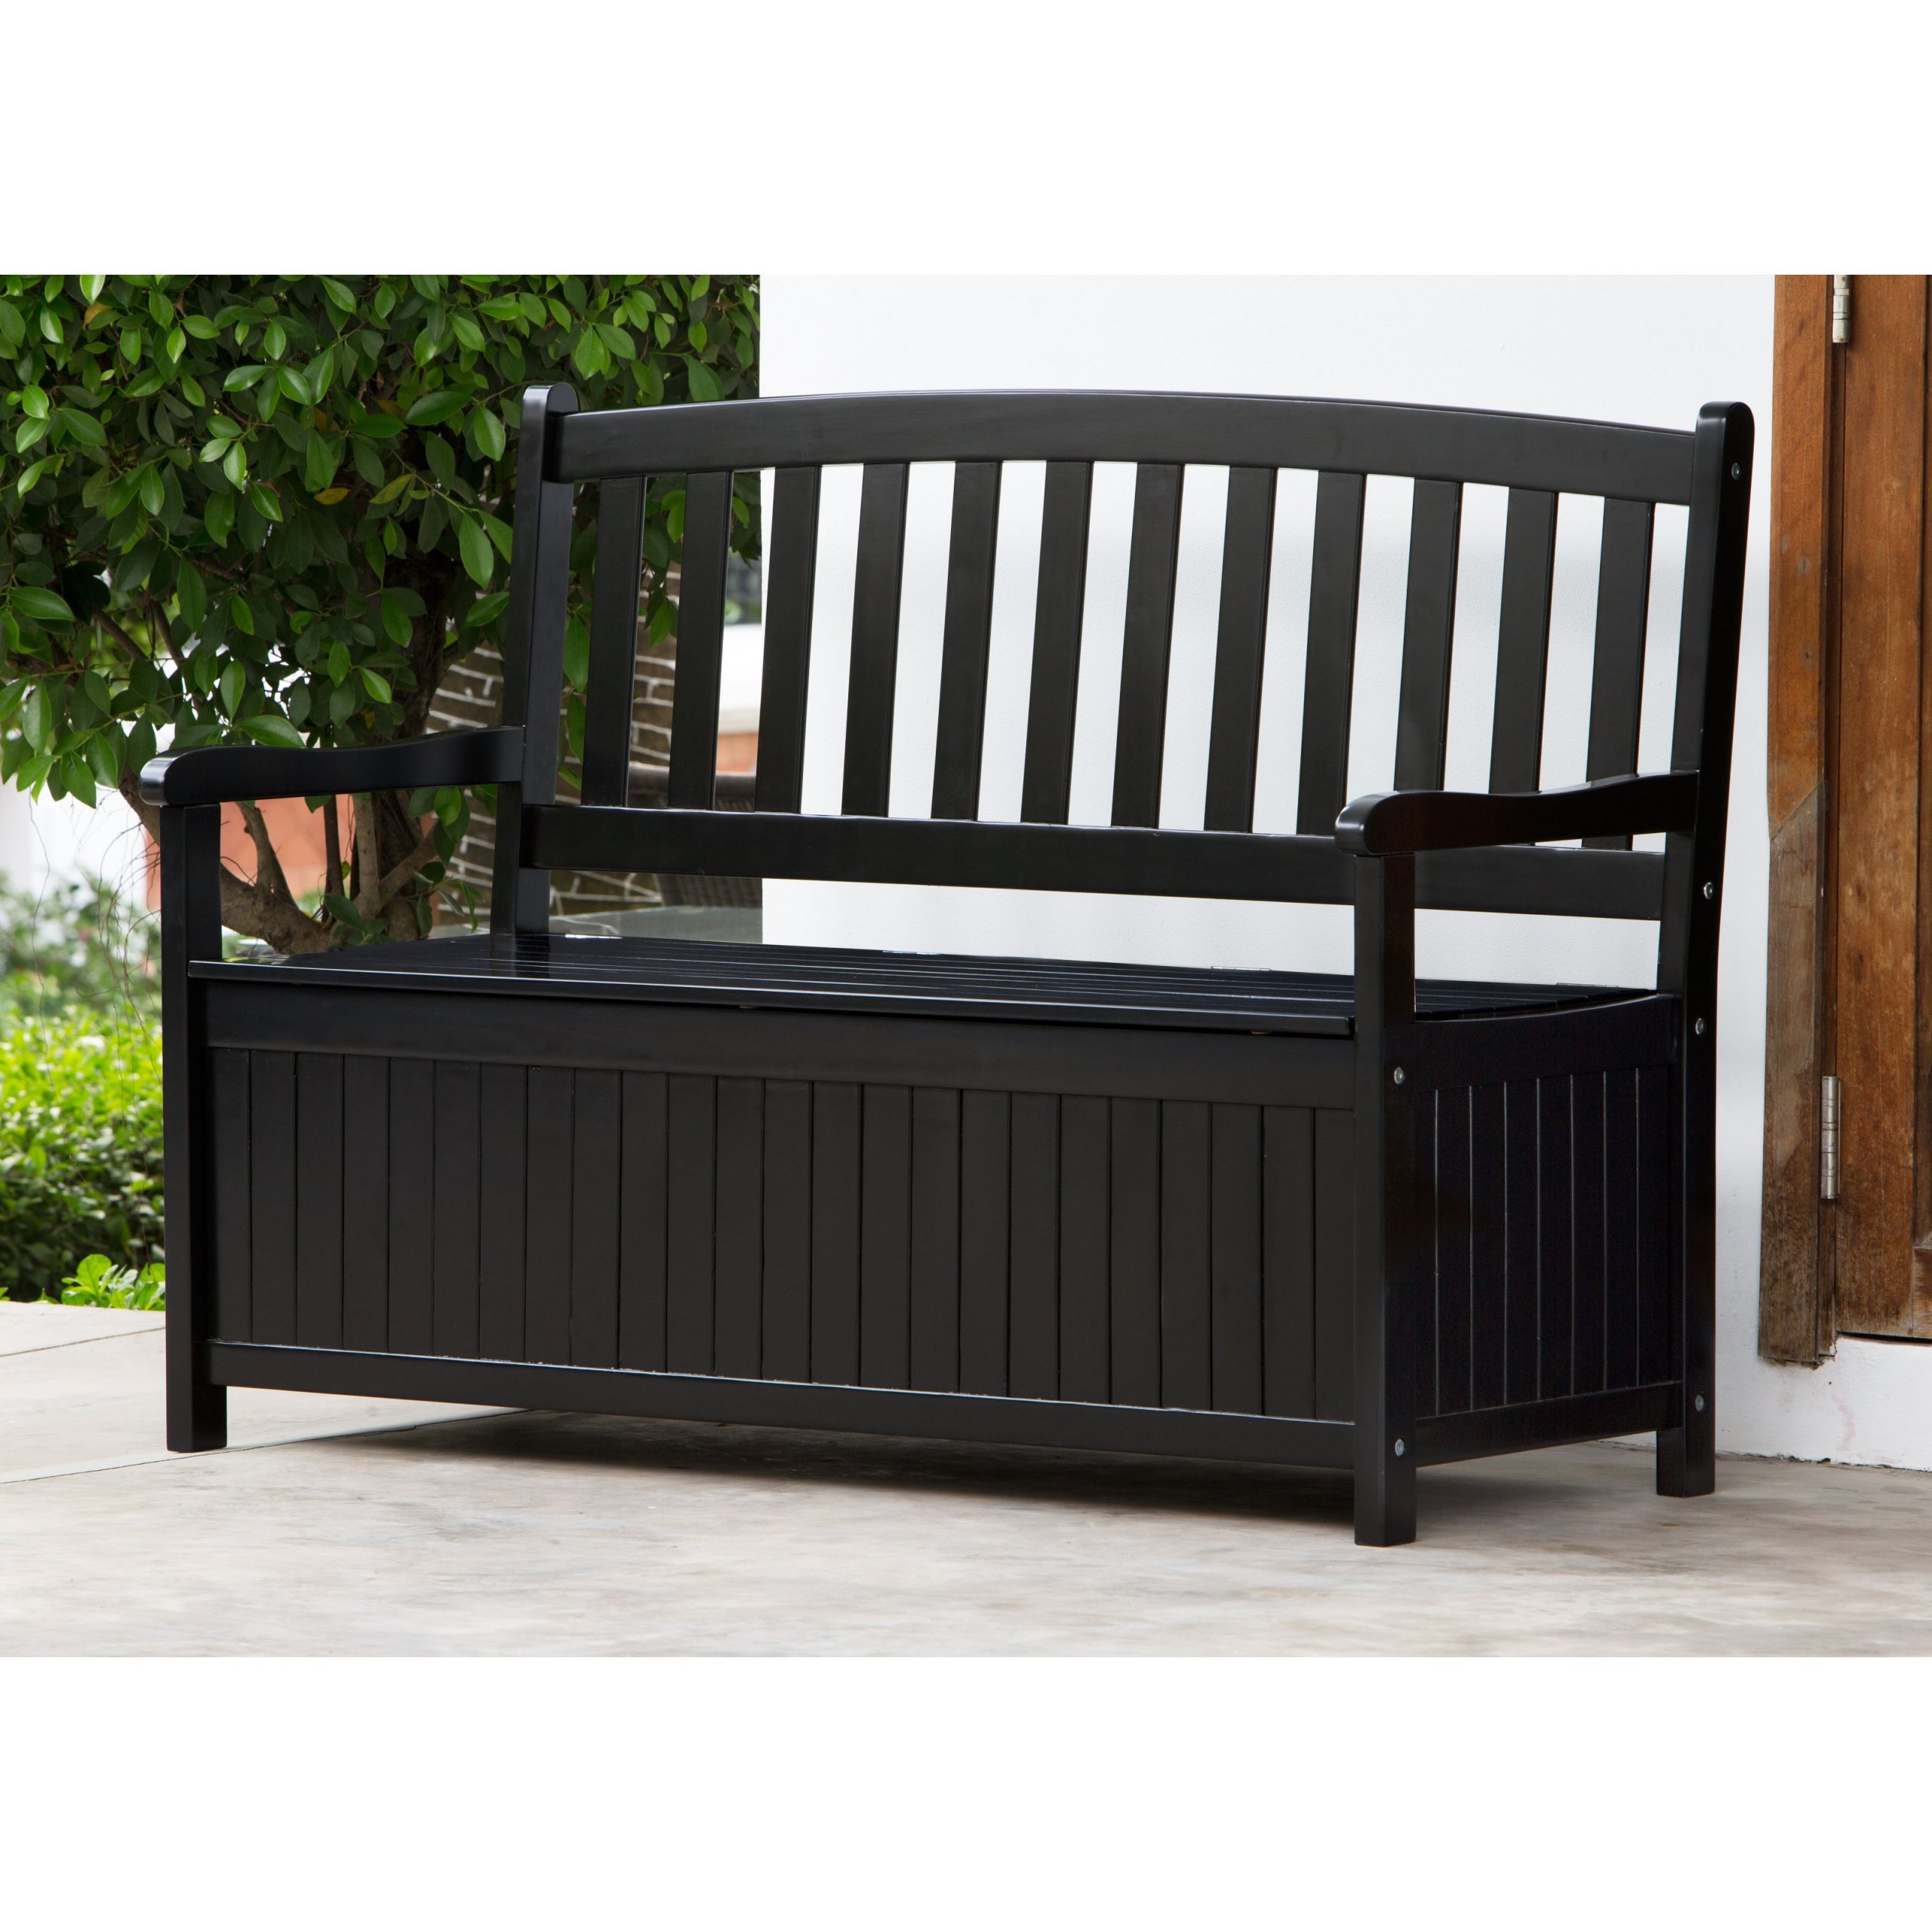 Black Bench With Storage
 Coral Coast Pleasant Bay 4 ft Curved Back Outdoor Wood